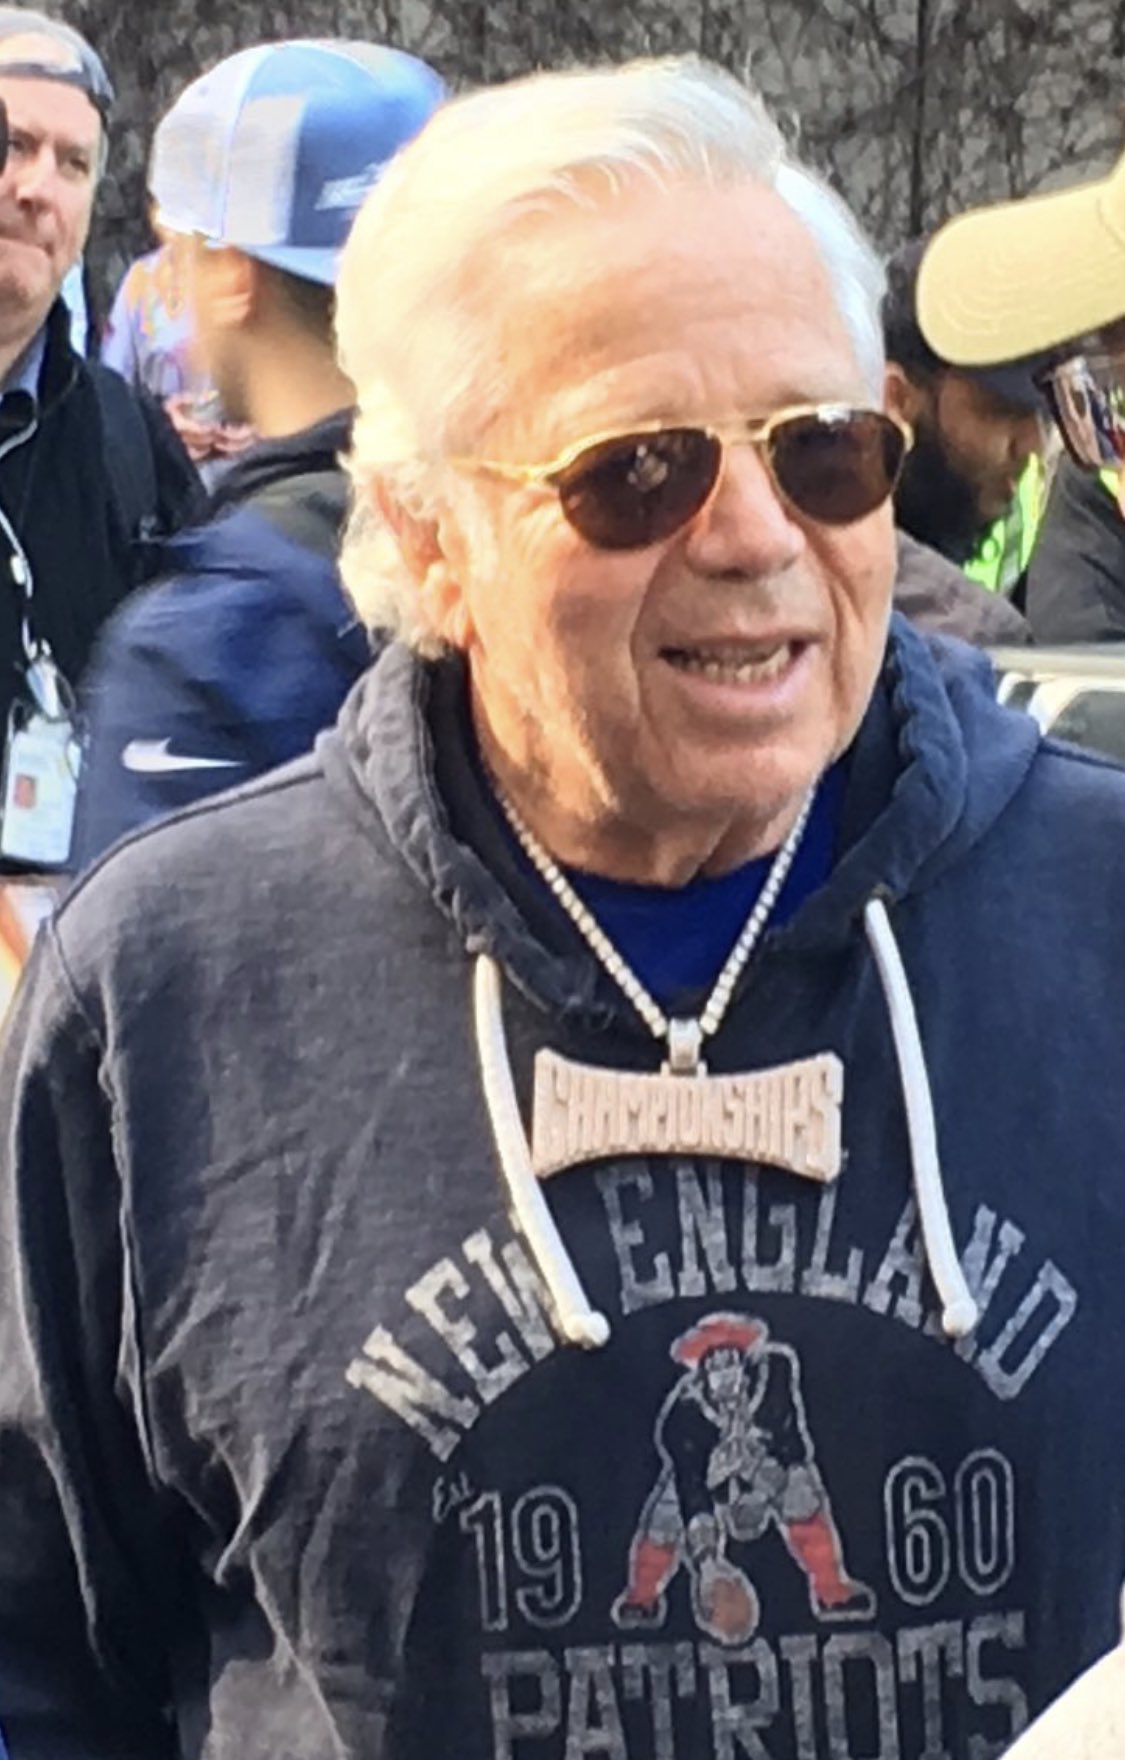 Video: Robert Kraft Caught on Video Getting Oral Sex at Asian Spa For $100 Per Court ...